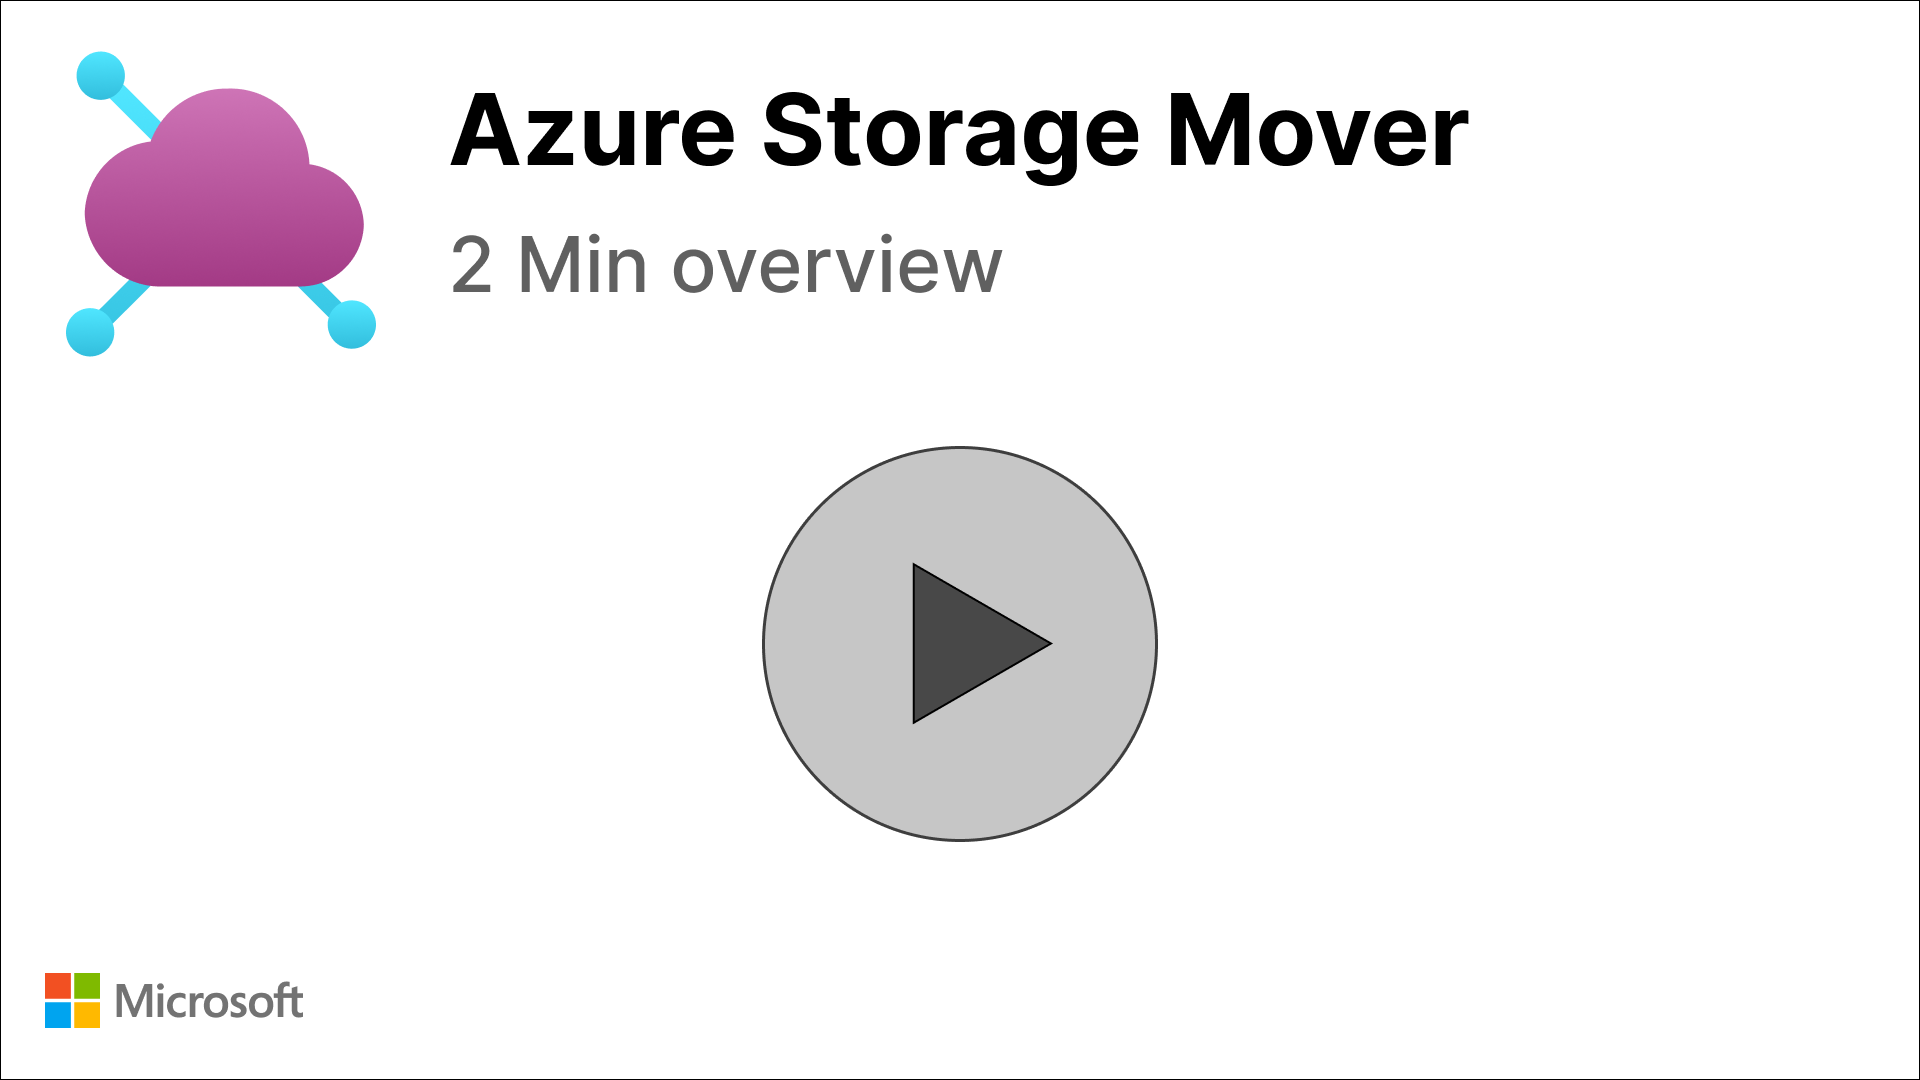 2-Minute demonstration video introducing Azure Storage Mover - click to play!